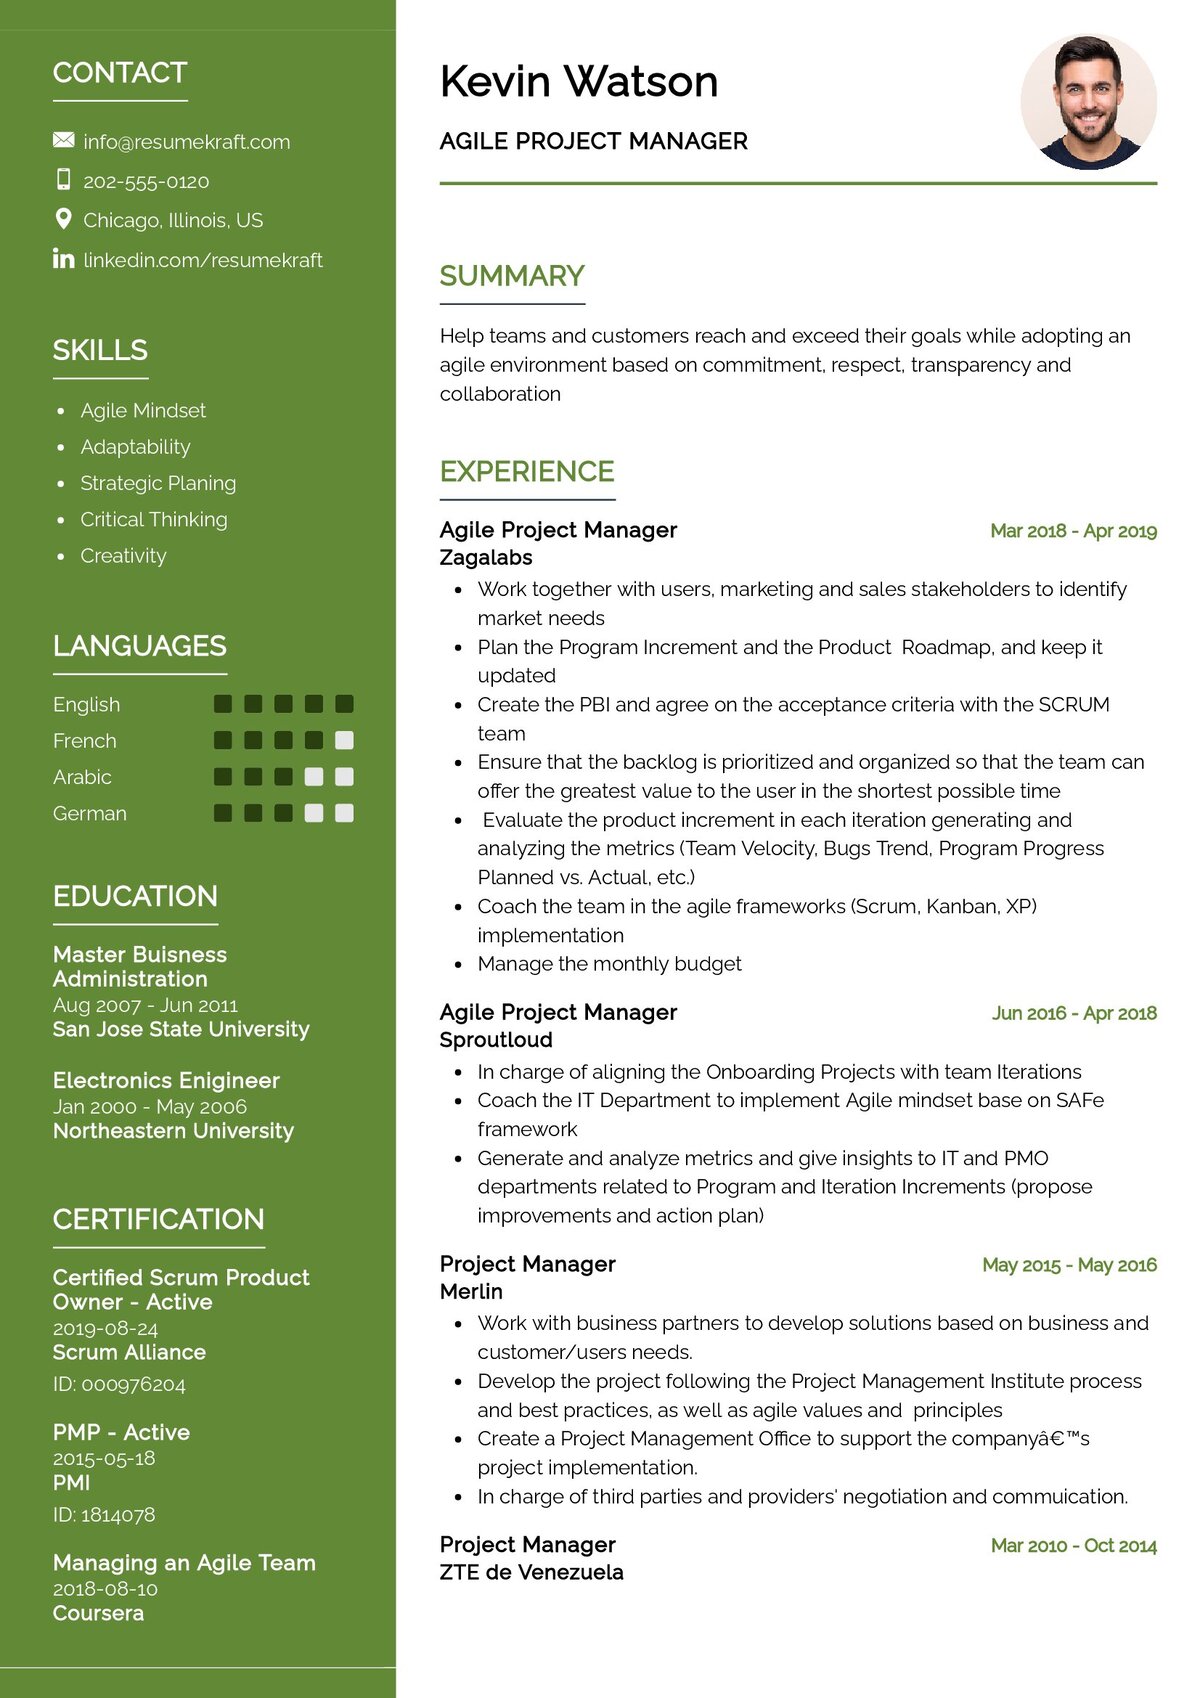 Agile Project Manager Resume Template in 2024 ResumeKraft